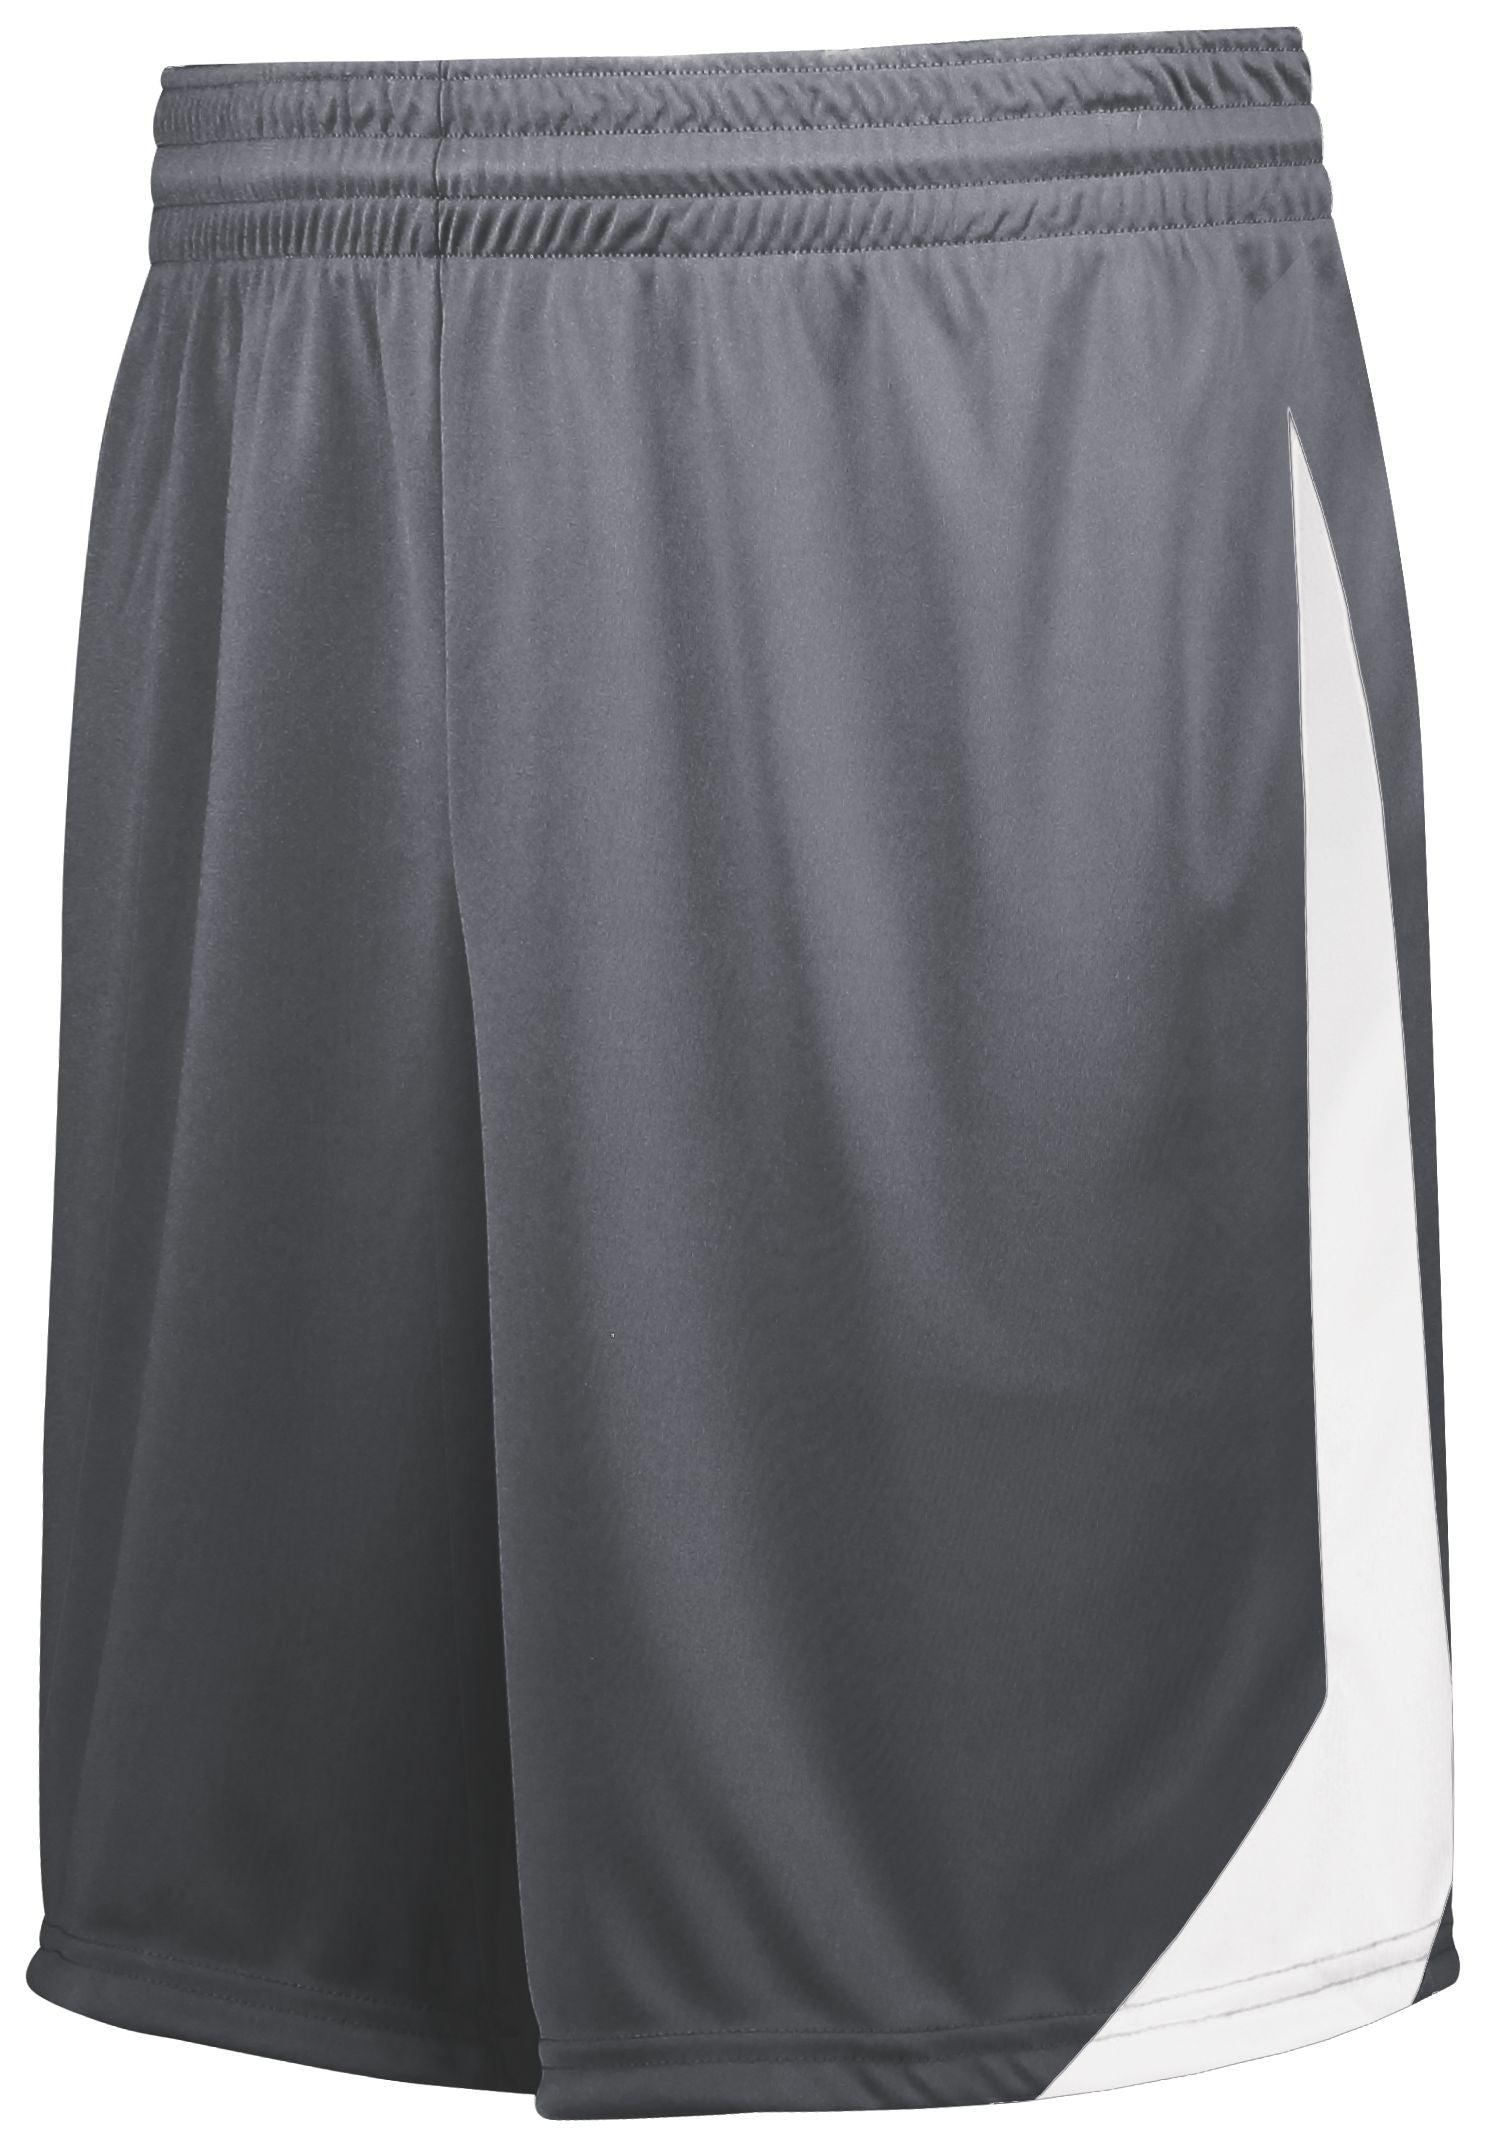 High 5 Athletico Shorts in Graphite/White  -Part of the Adult, Adult-Shorts, High5-Products, Soccer, All-Sports-1 product lines at KanaleyCreations.com